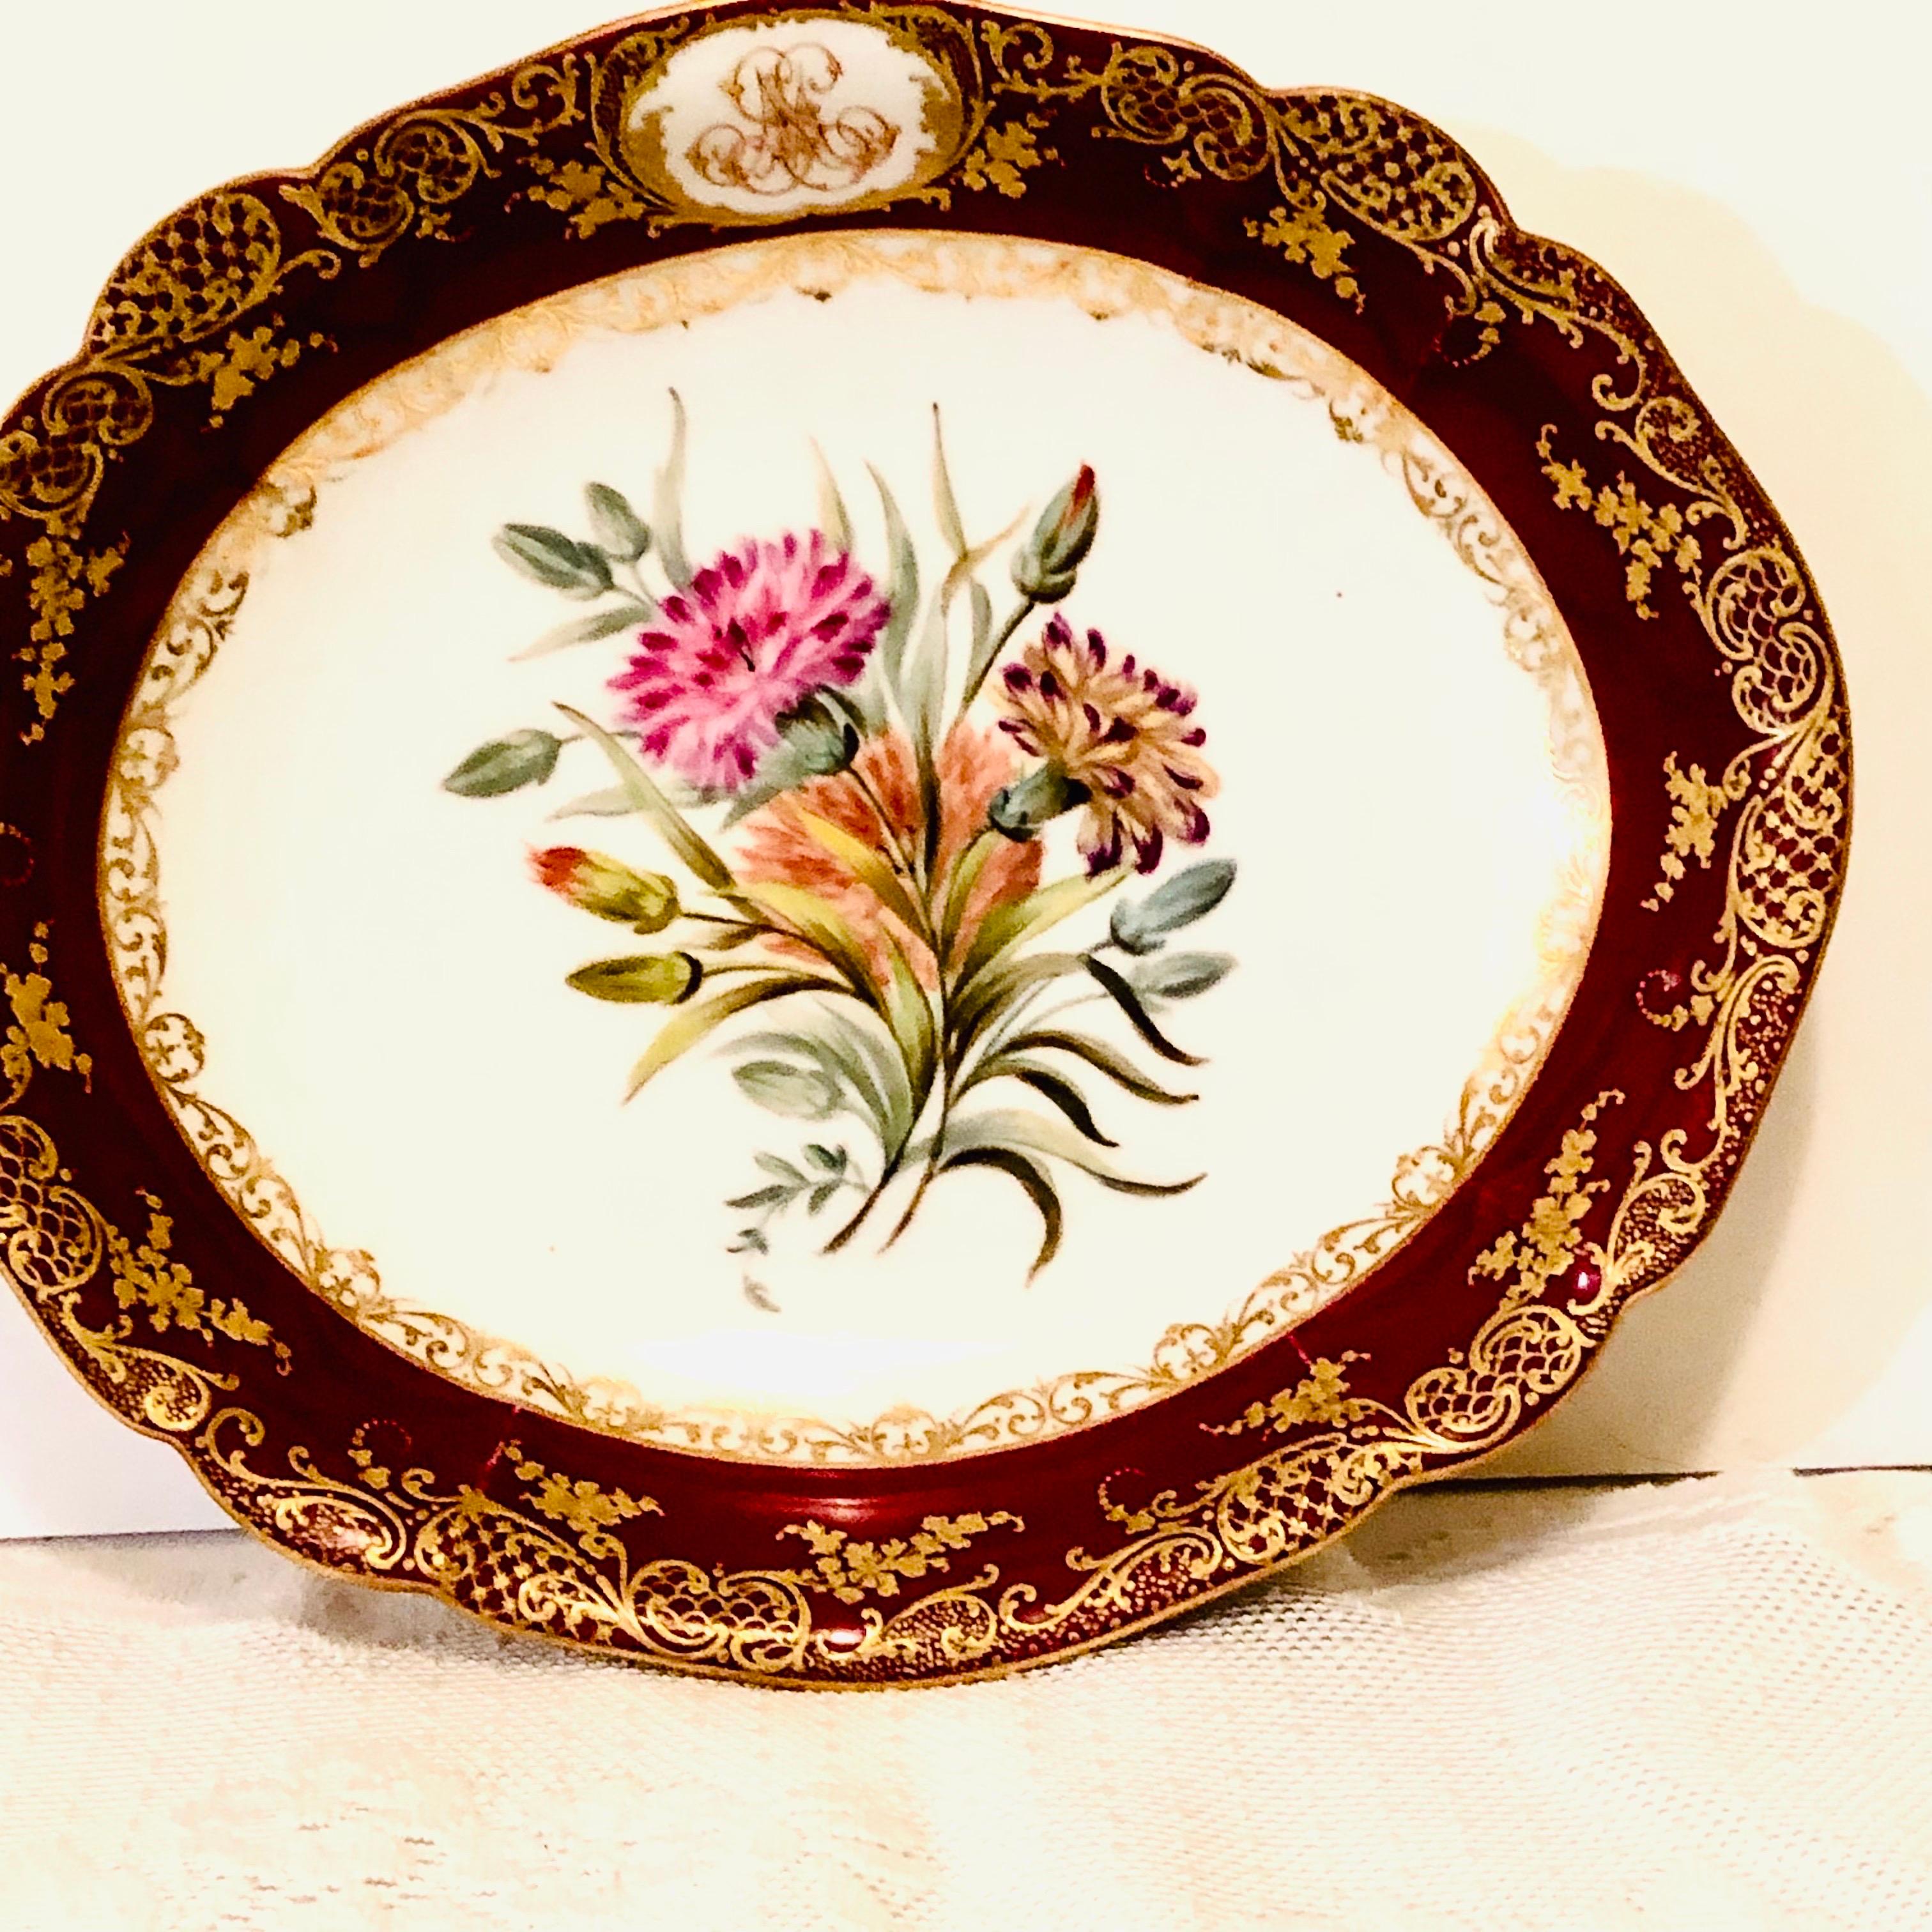 Rococo Old Paris Porcelain Oval Bowl Beautifully Painted With Carnations Signed Boyer 